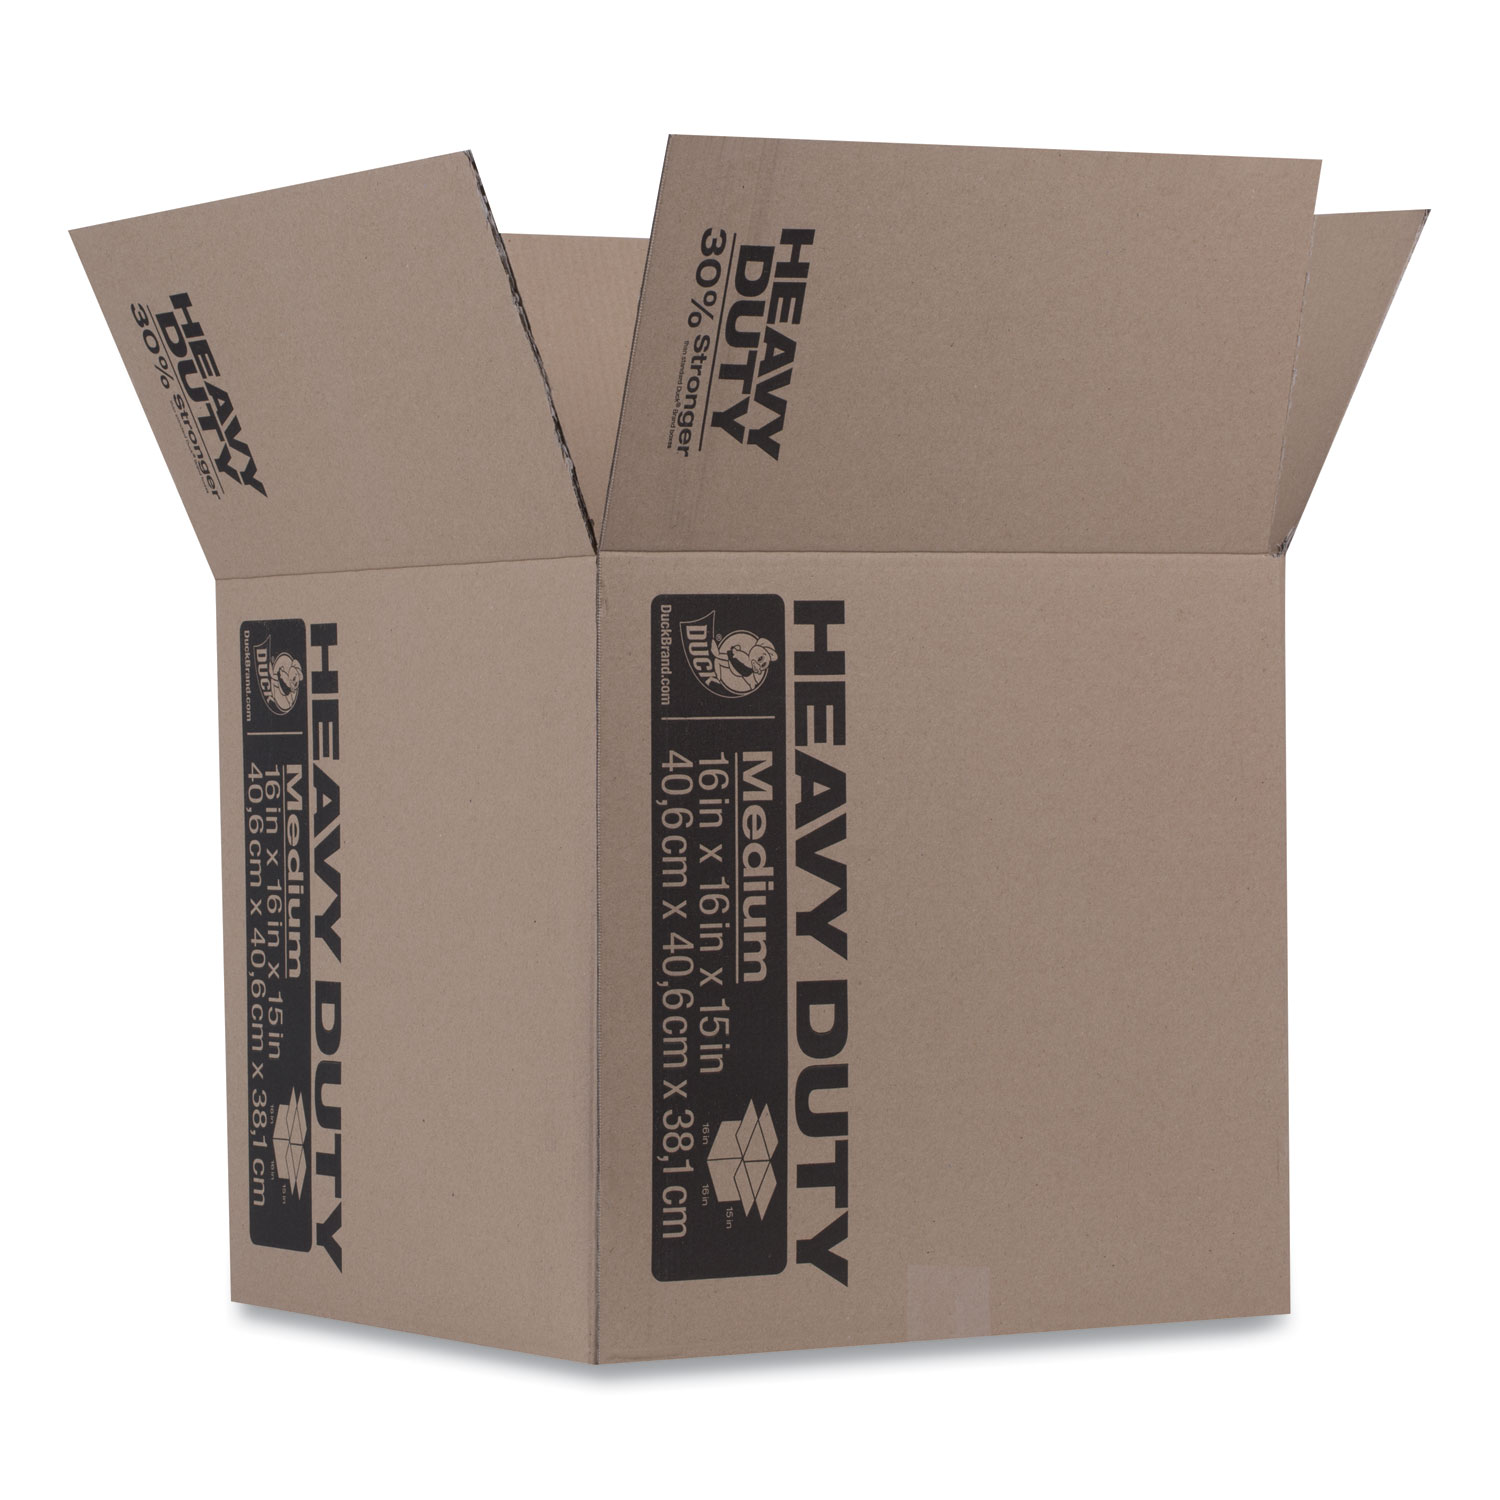  Duck 280728 Heavy-Duty Boxes, Regular Slotted Container (RSC), 16 x 16 x 15, Brown (DUC280728) 